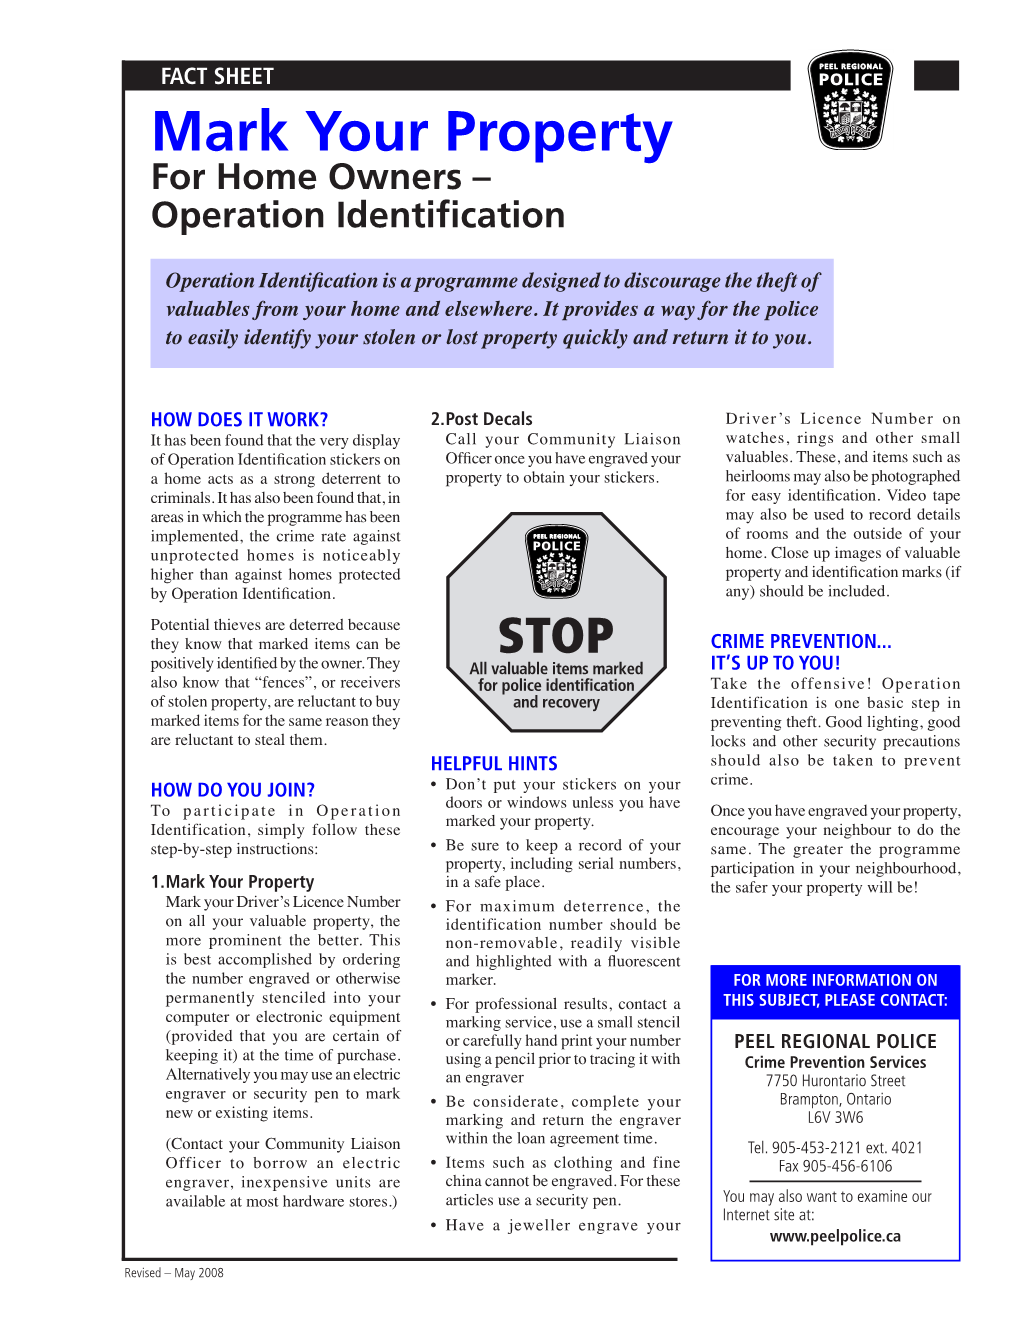 Mark Your Property for Home Owners – Operation Identification